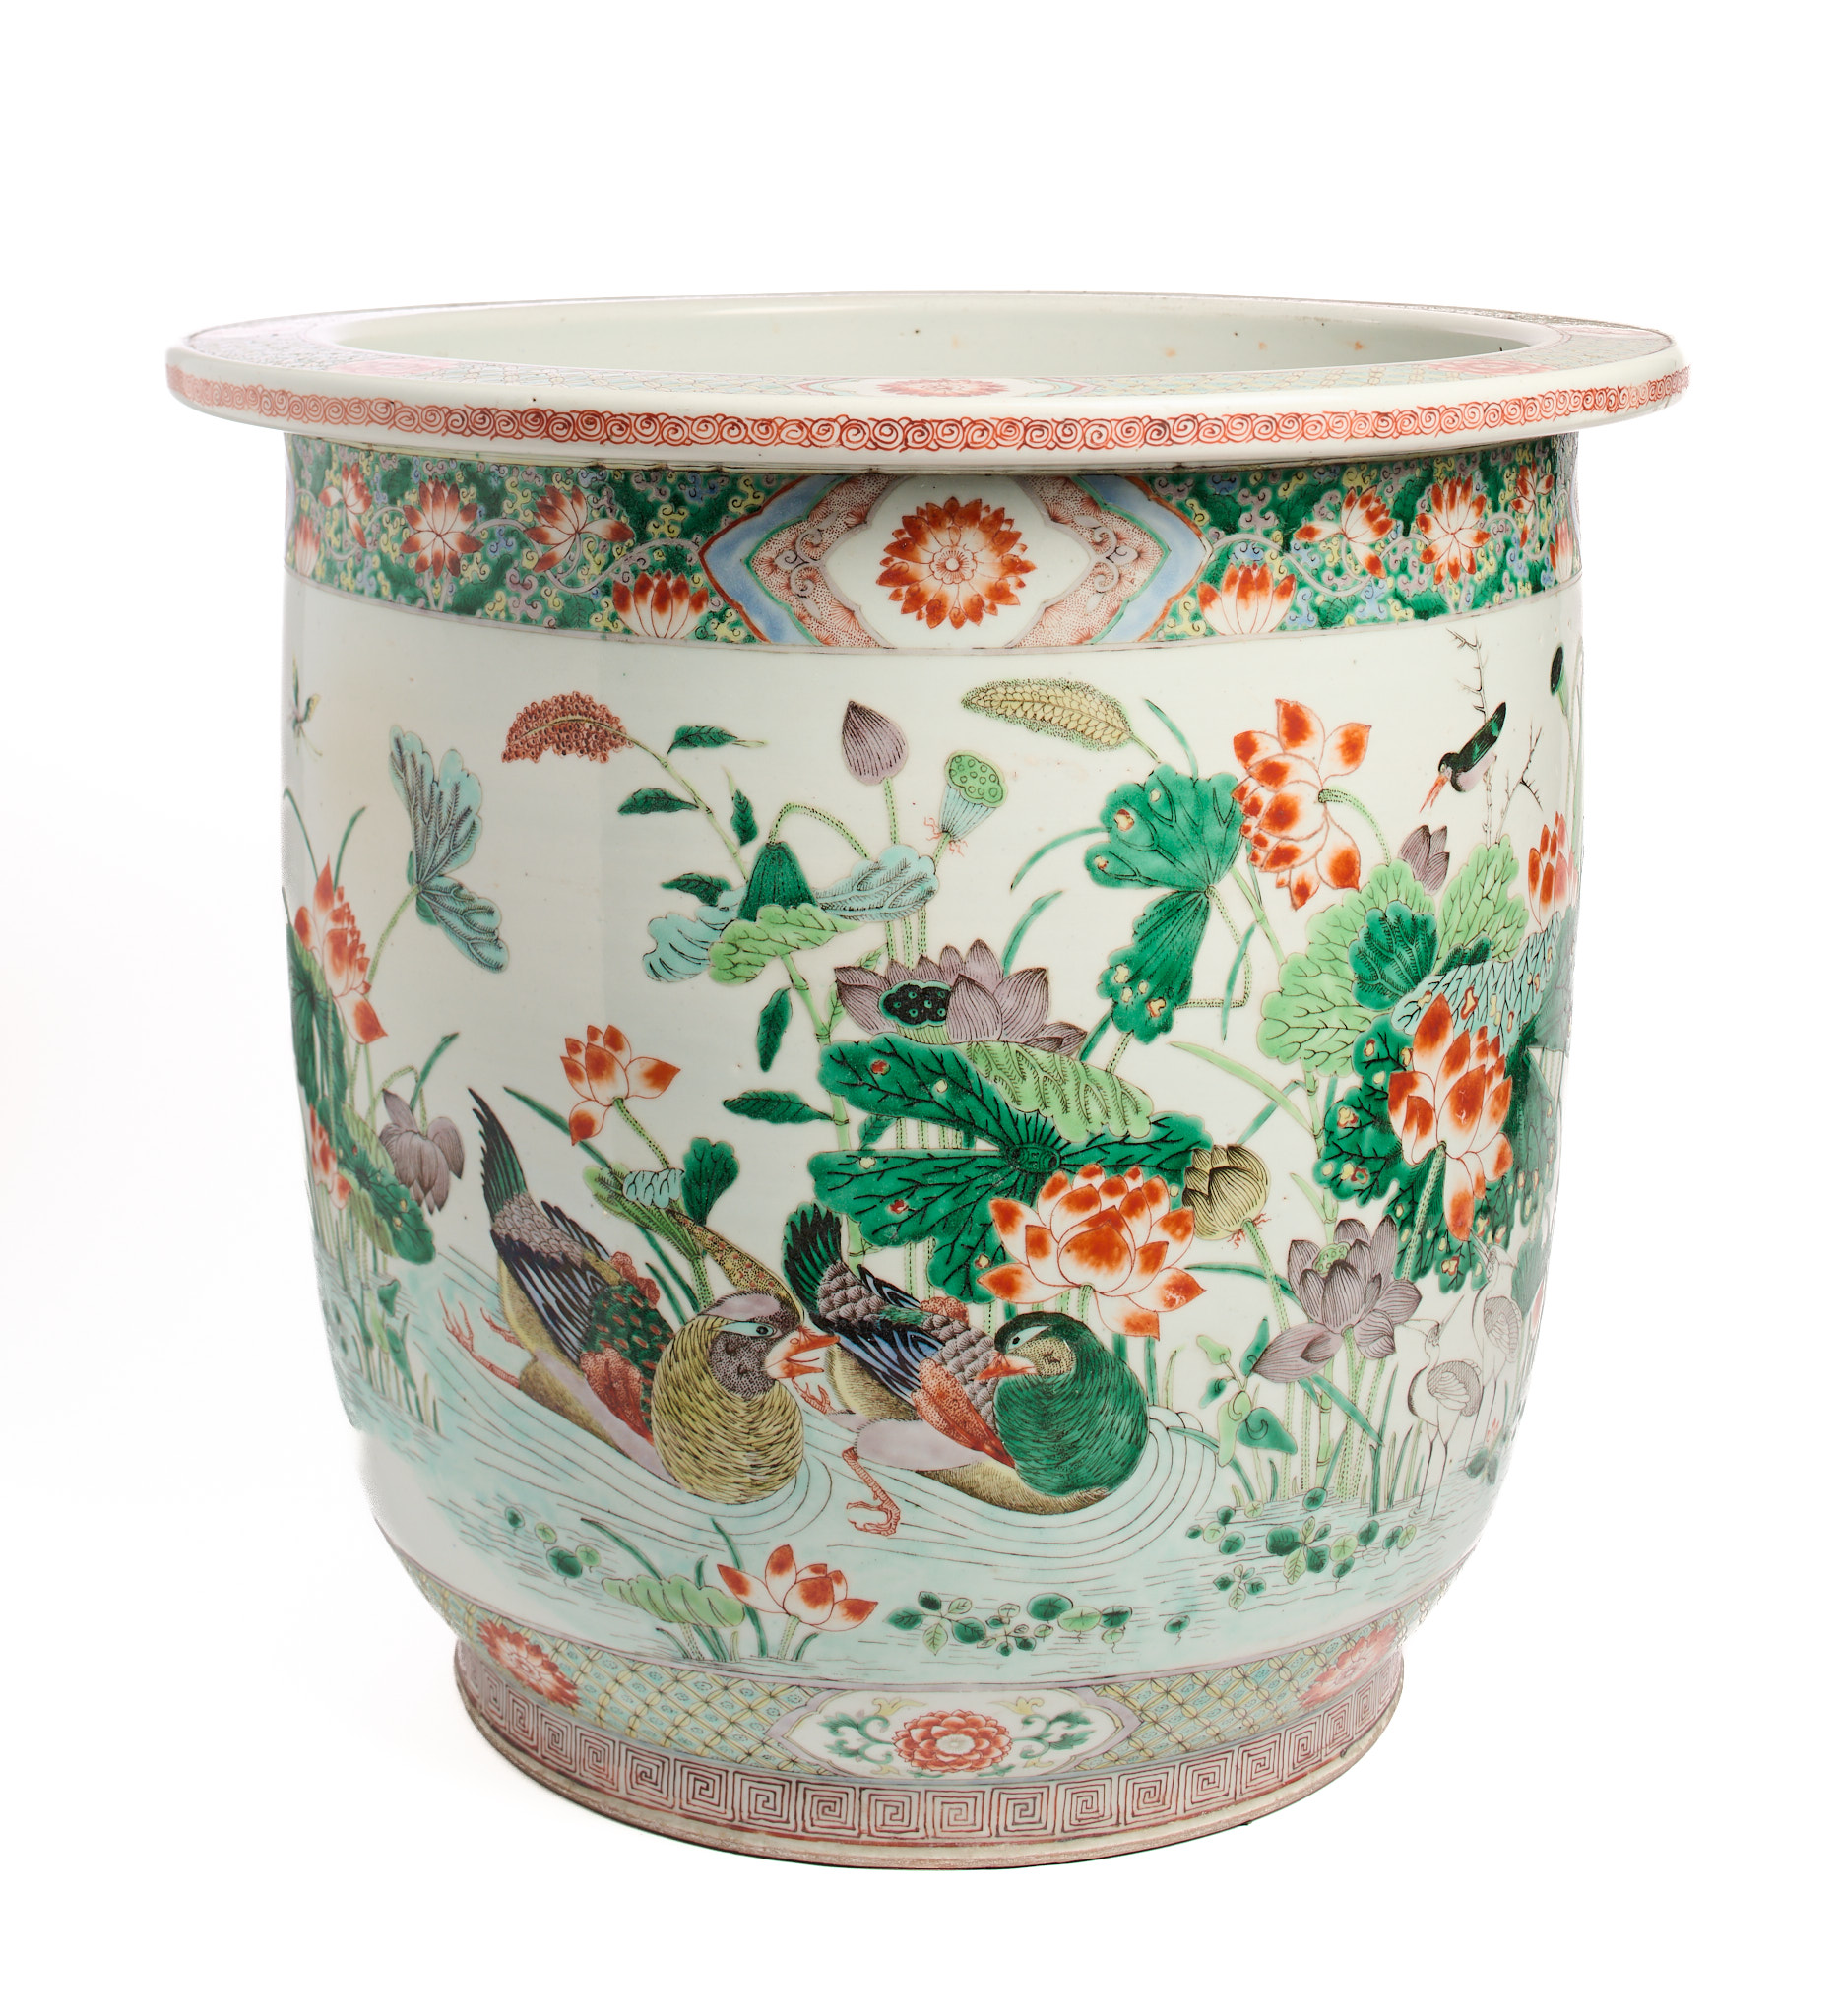 A LARGE CHINESE FAMILLE-VERTE JARDINIERE, LATE QING DYNASTY, CIRCA 1900